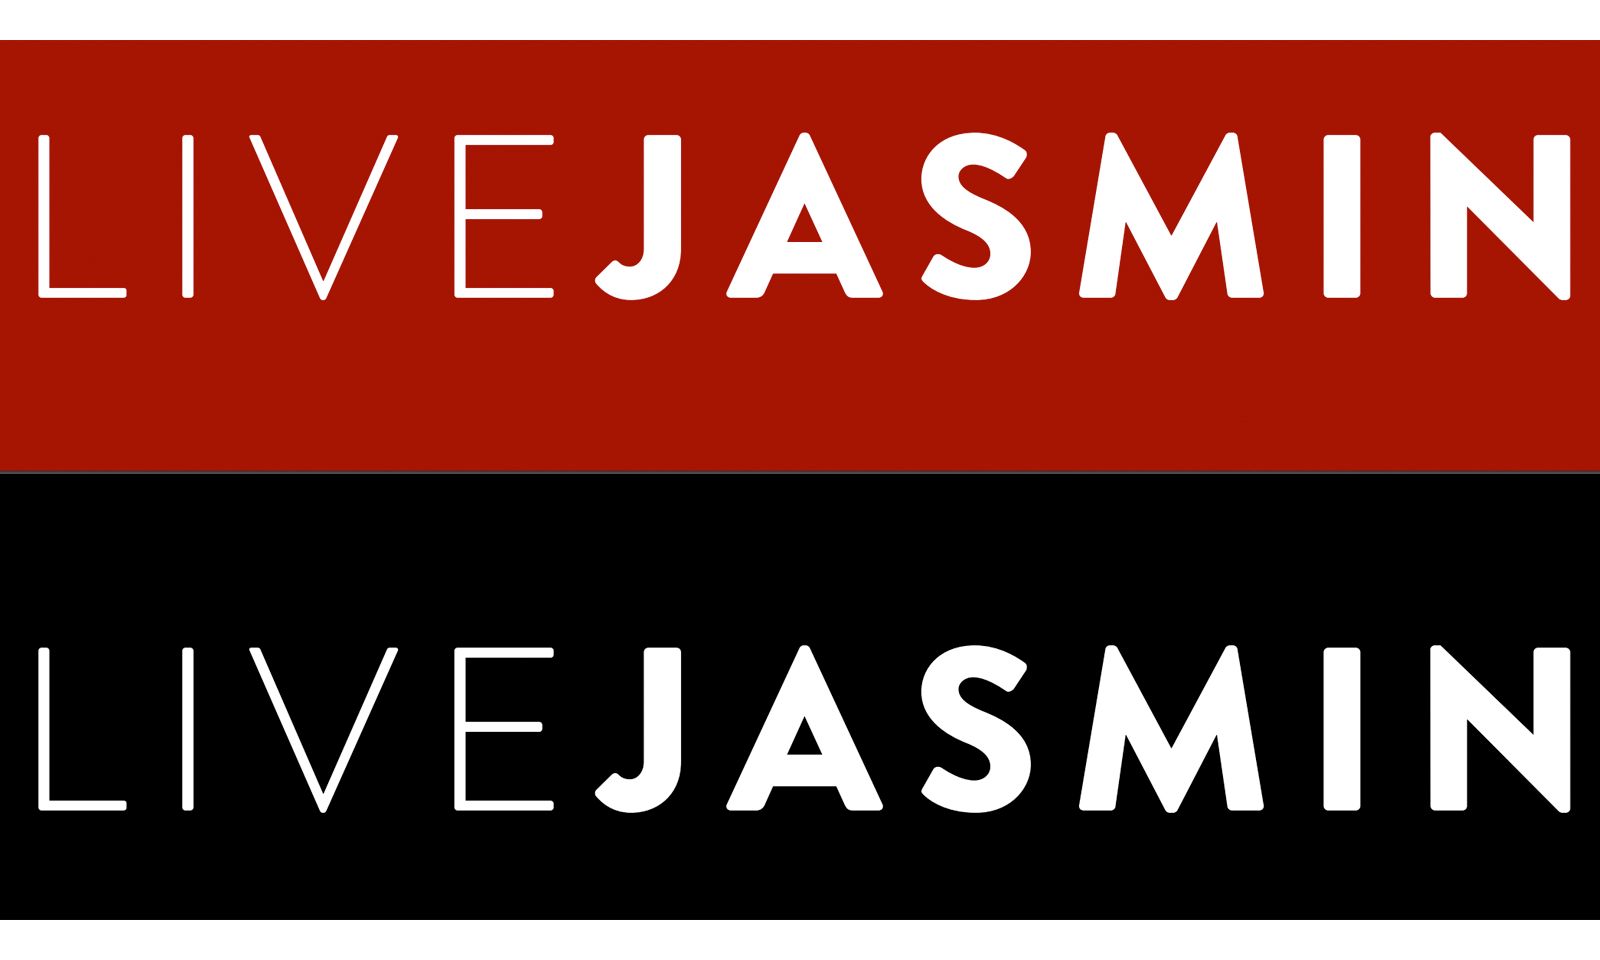 LiveJasmin Adds New Services: MyStory, VideoCall